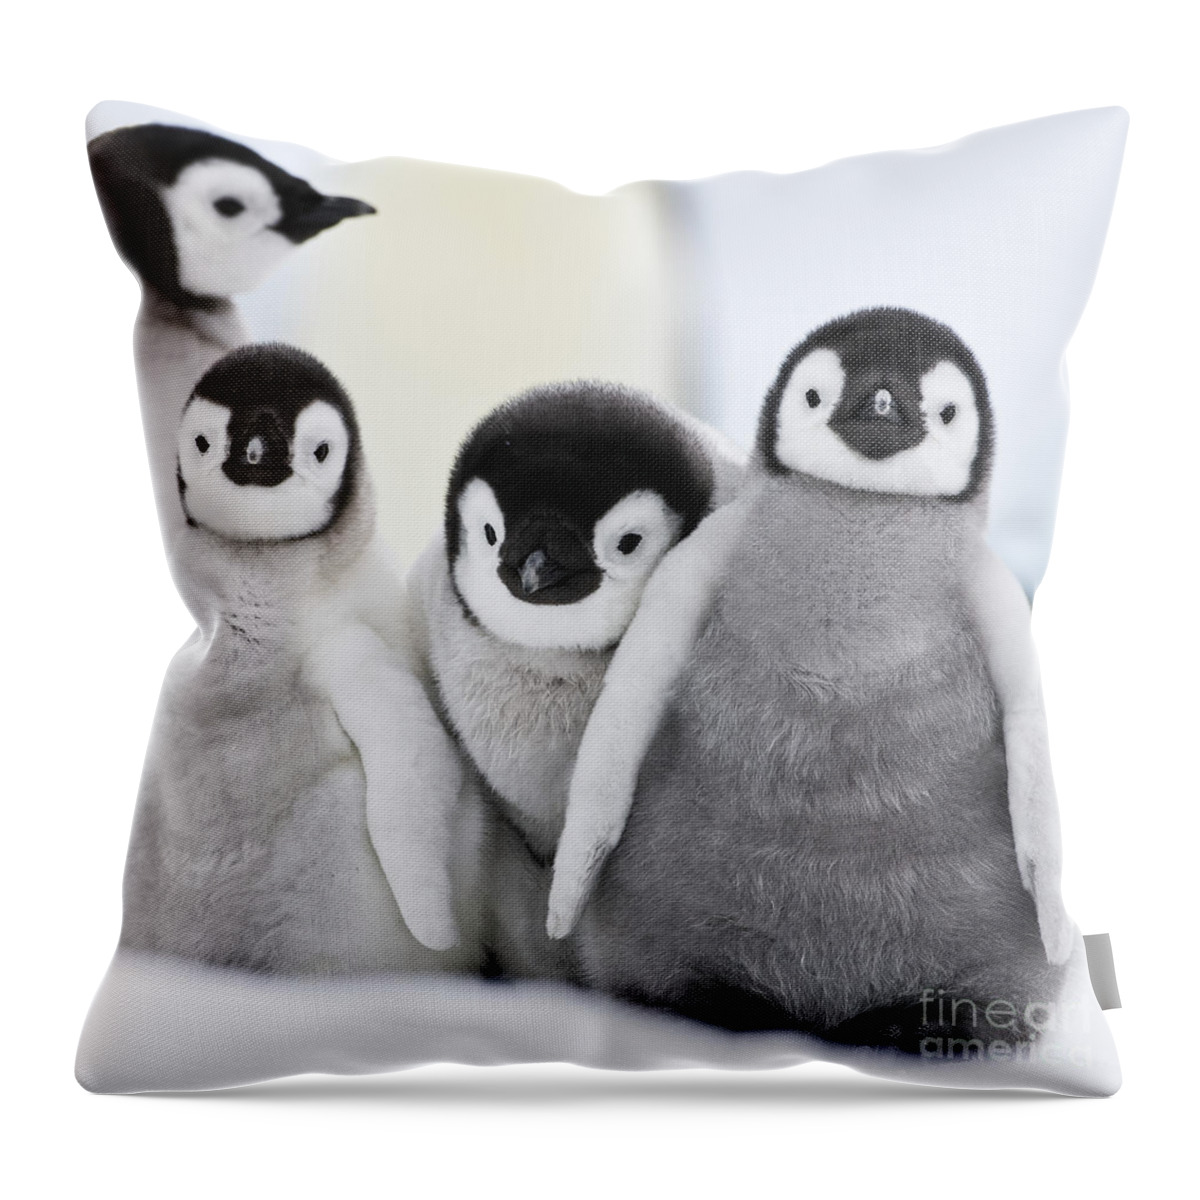 Emperor Penguin Throw Pillow featuring the photograph Emperor Penguin Chicks #1 by Jean-Louis Klein and Marie-Luce Hubert